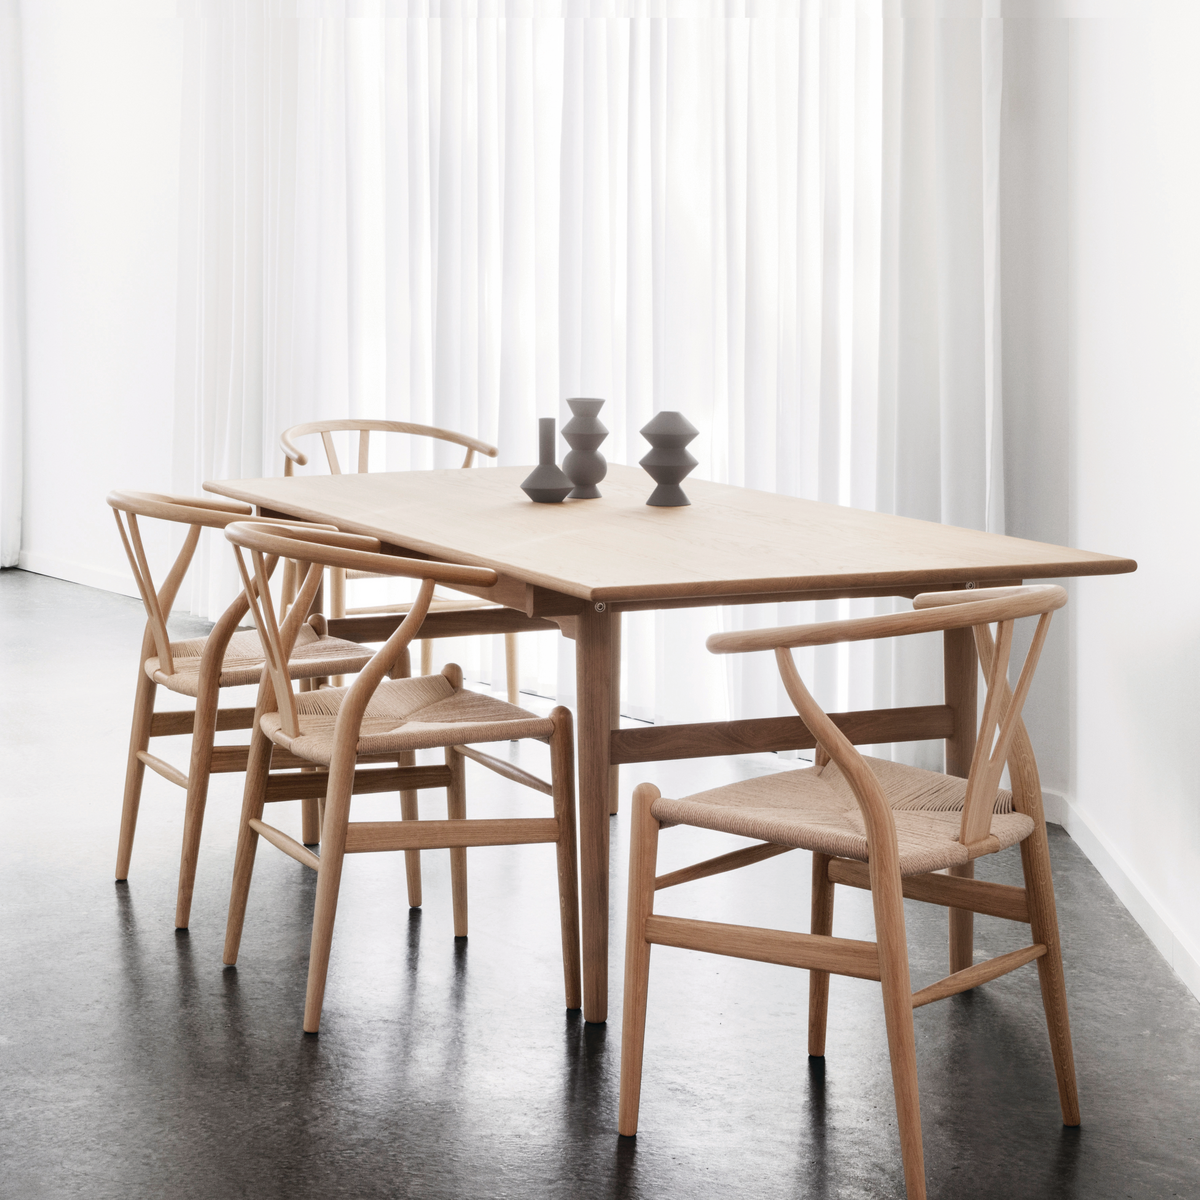 Wood chairs match with wood table in dining space.